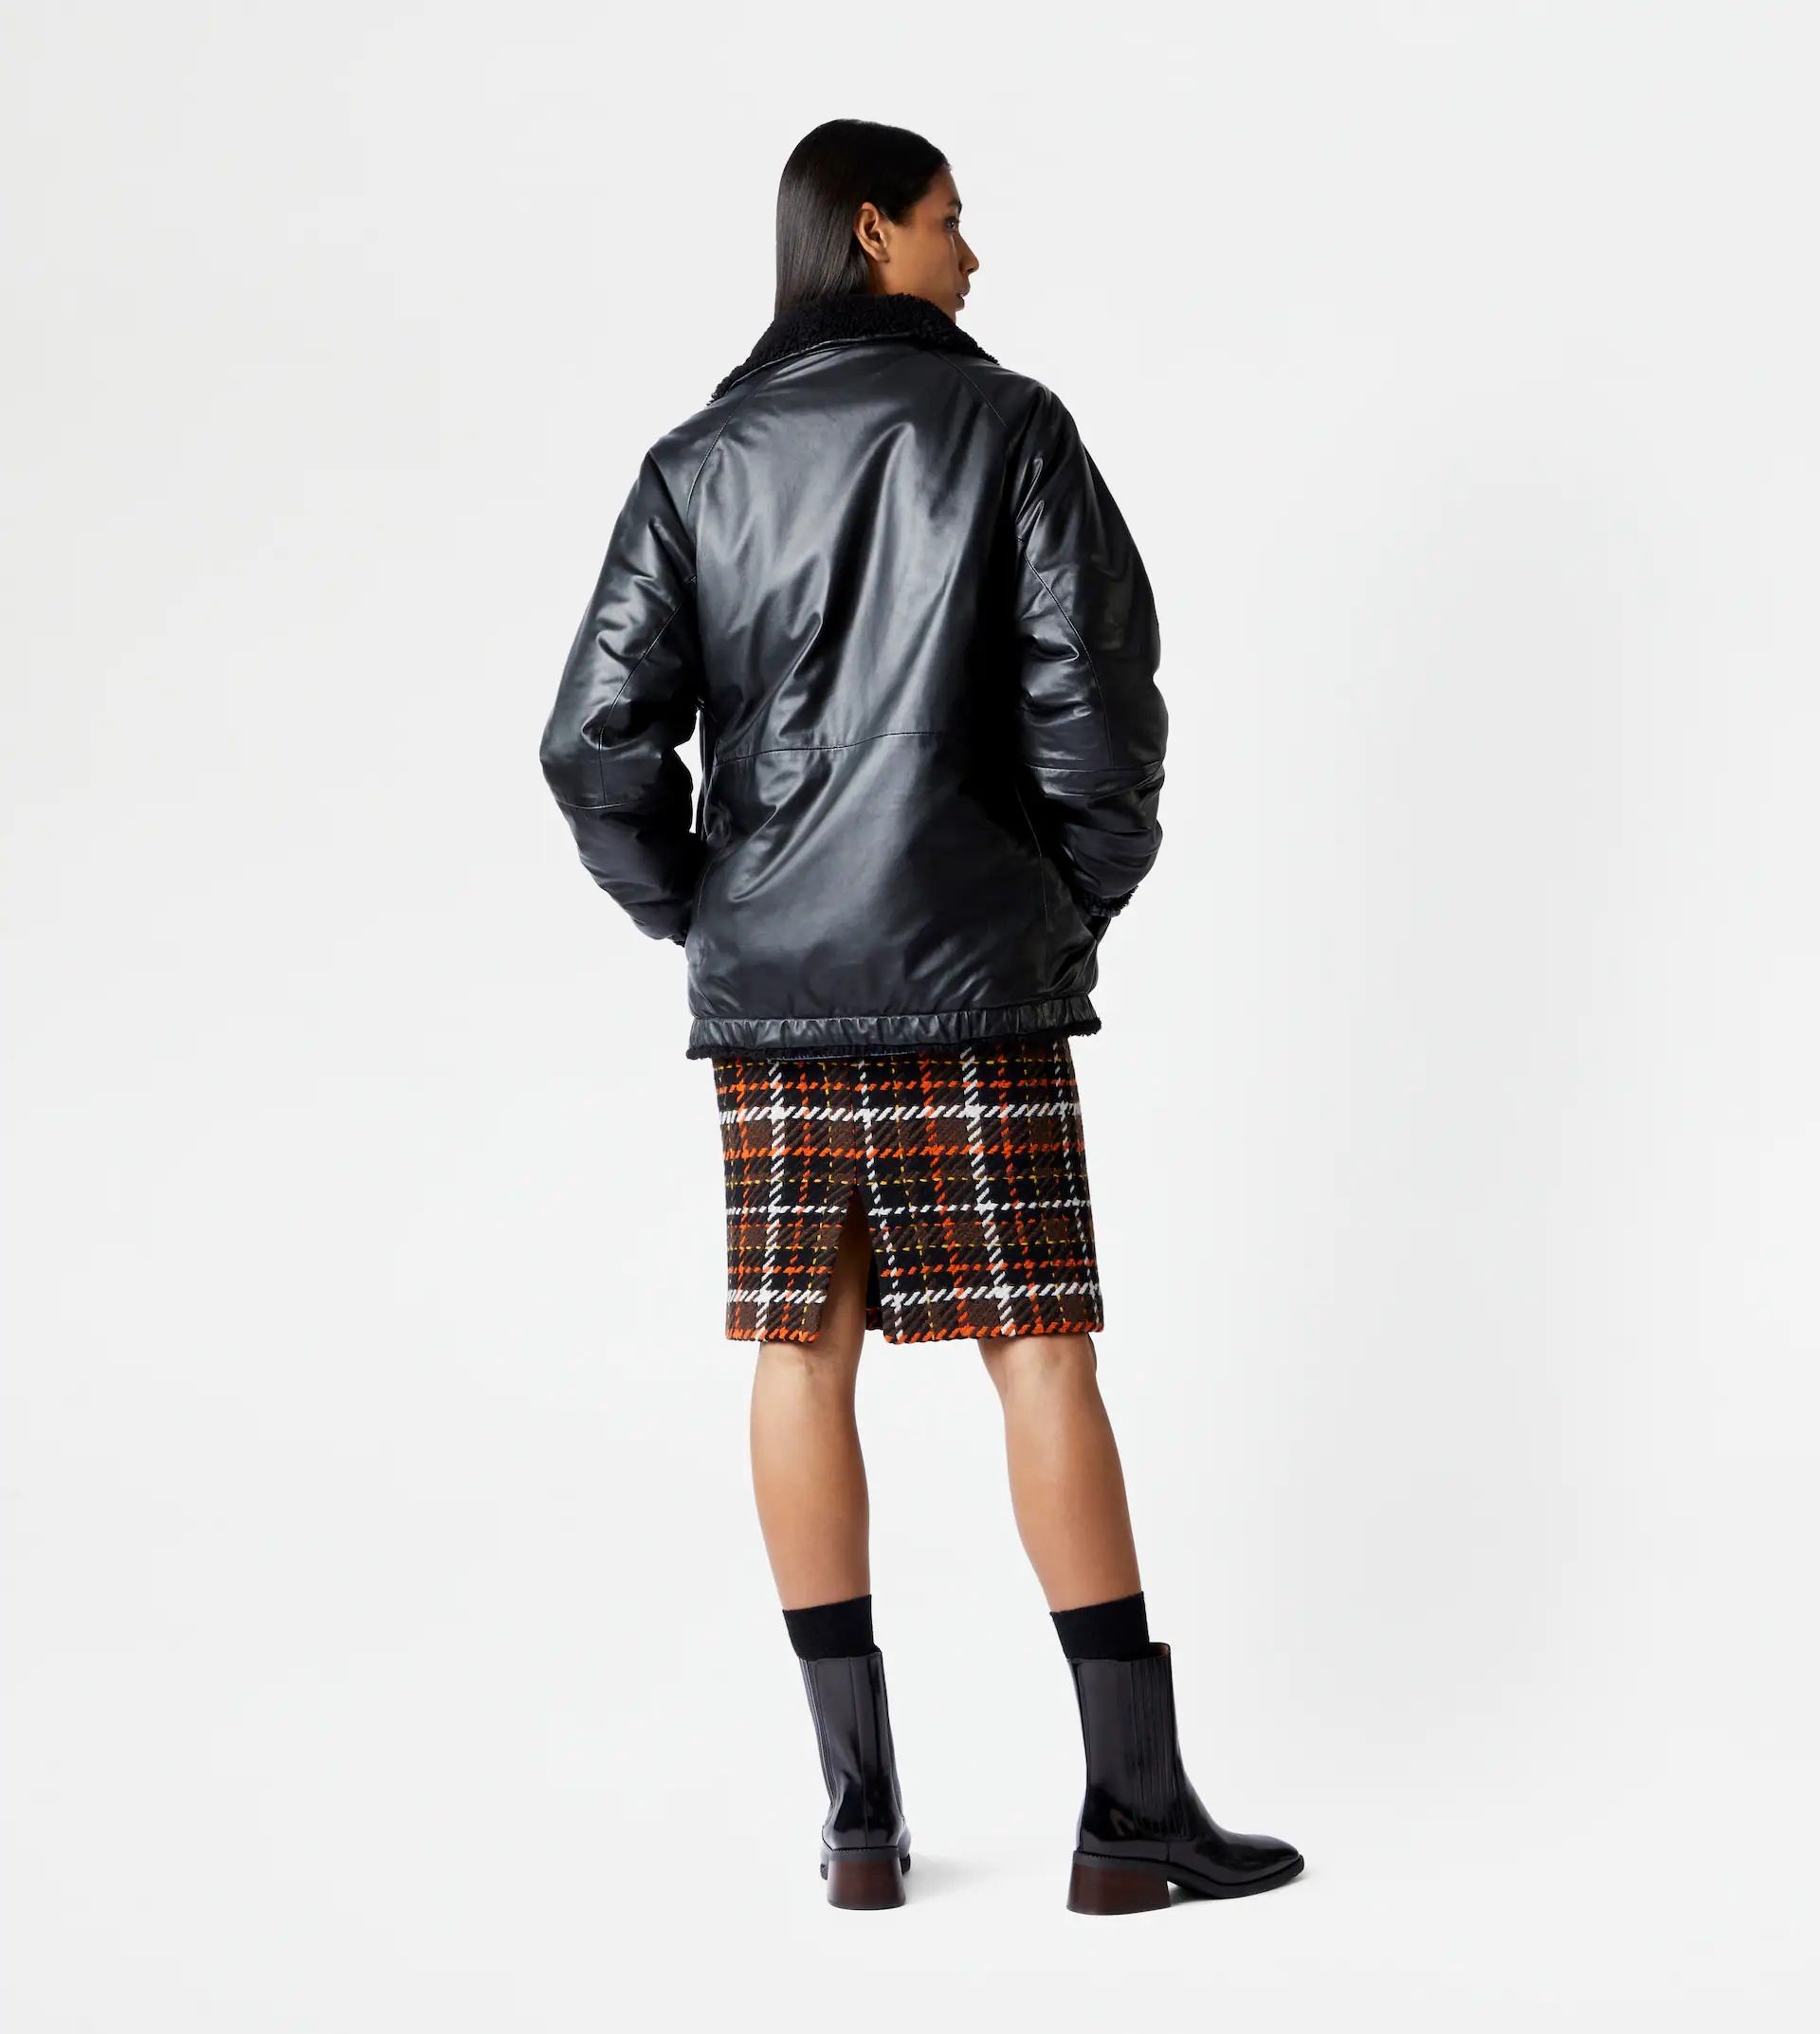 TOD'S BOMBER JACKET IN LEATHER - BLACK - 3